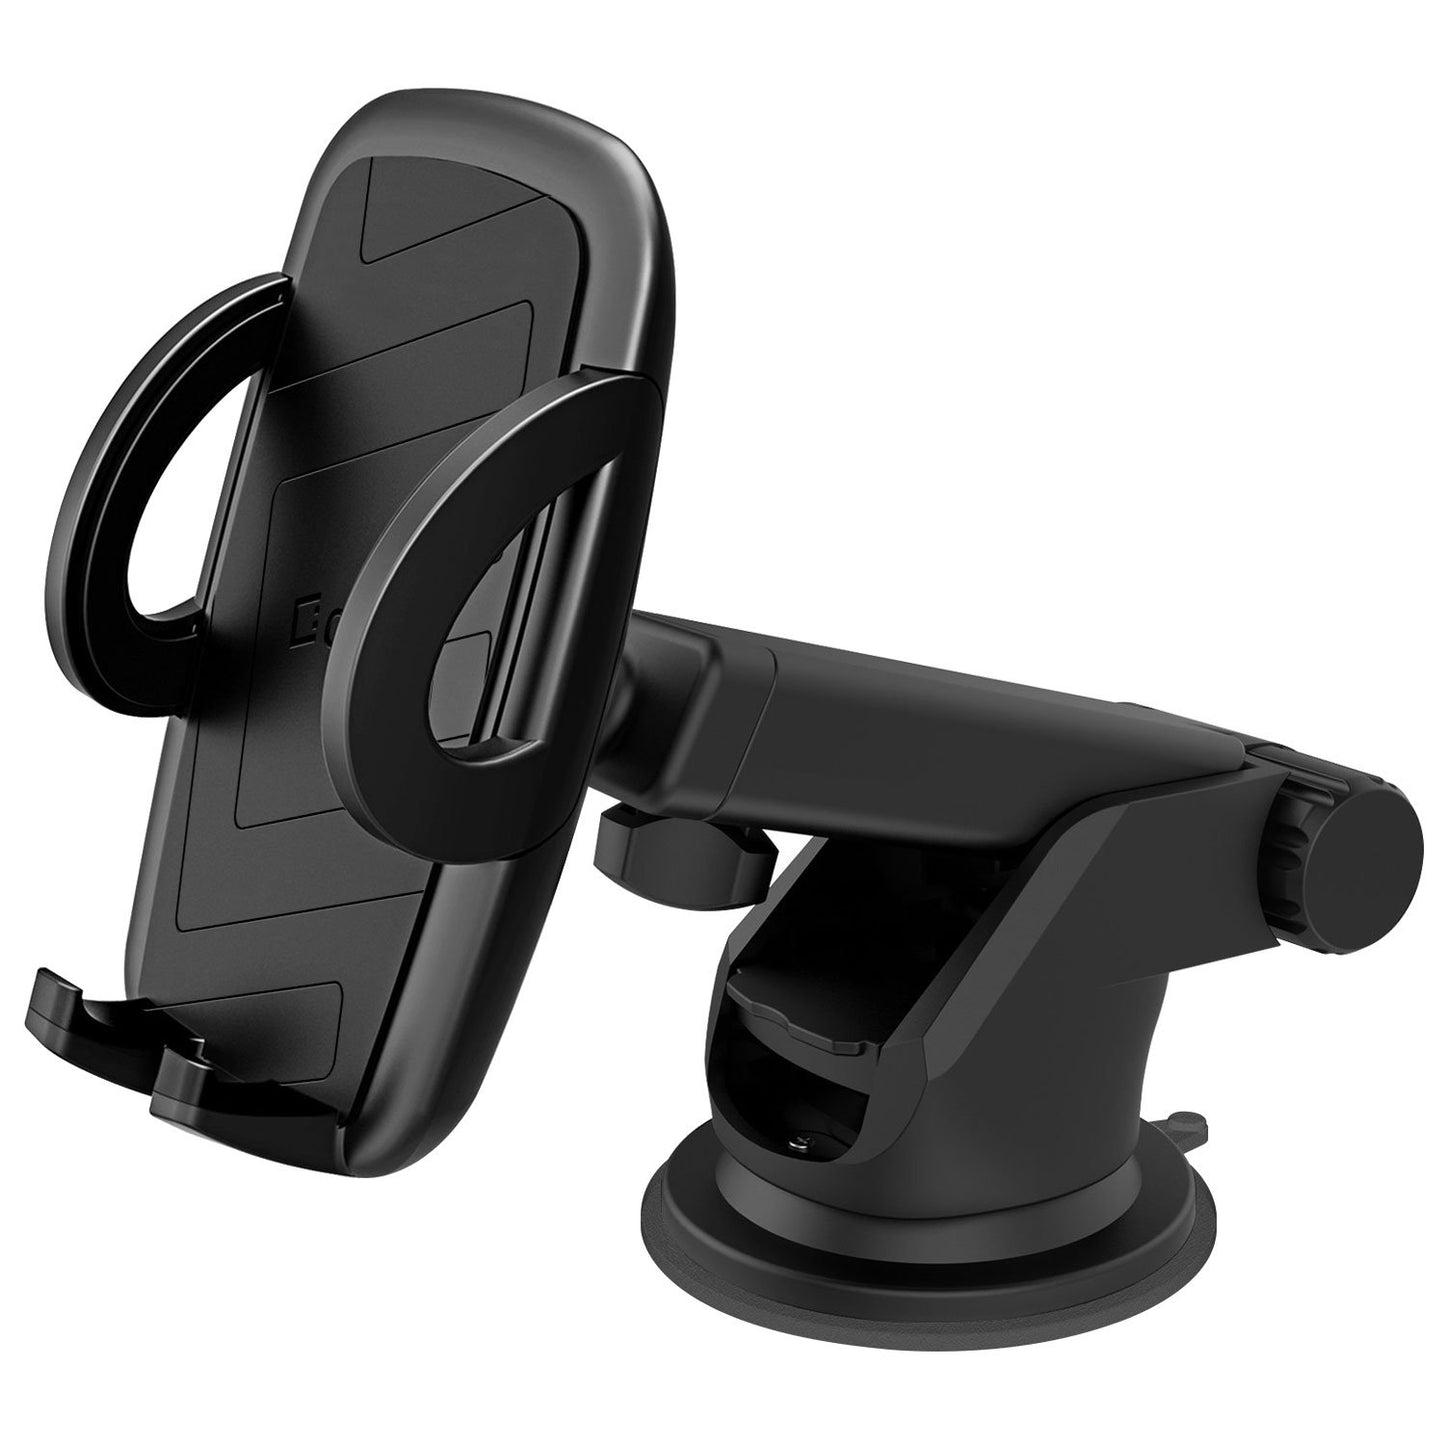 PHD350 - Universal Extendable Telescopic Arm Windshield and Dashboard Smartphone Holder Mount by Cellet